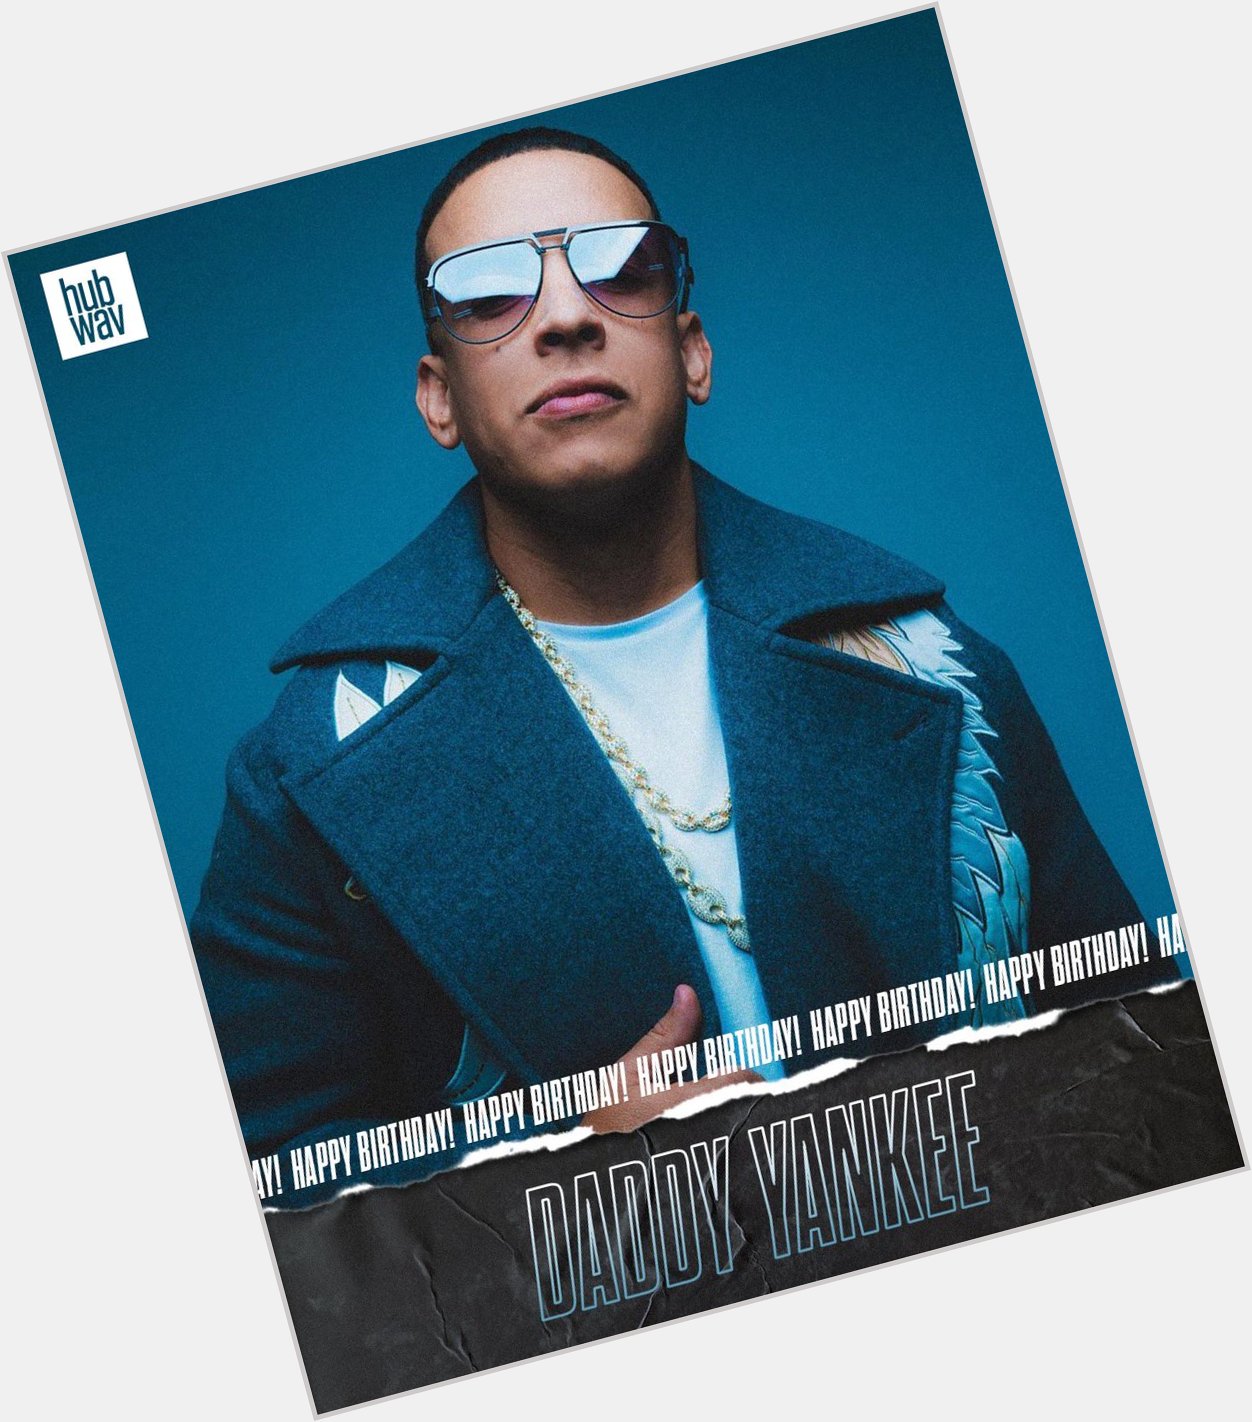 Happy Birthday Whats your favorite Daddy Yankee song? 